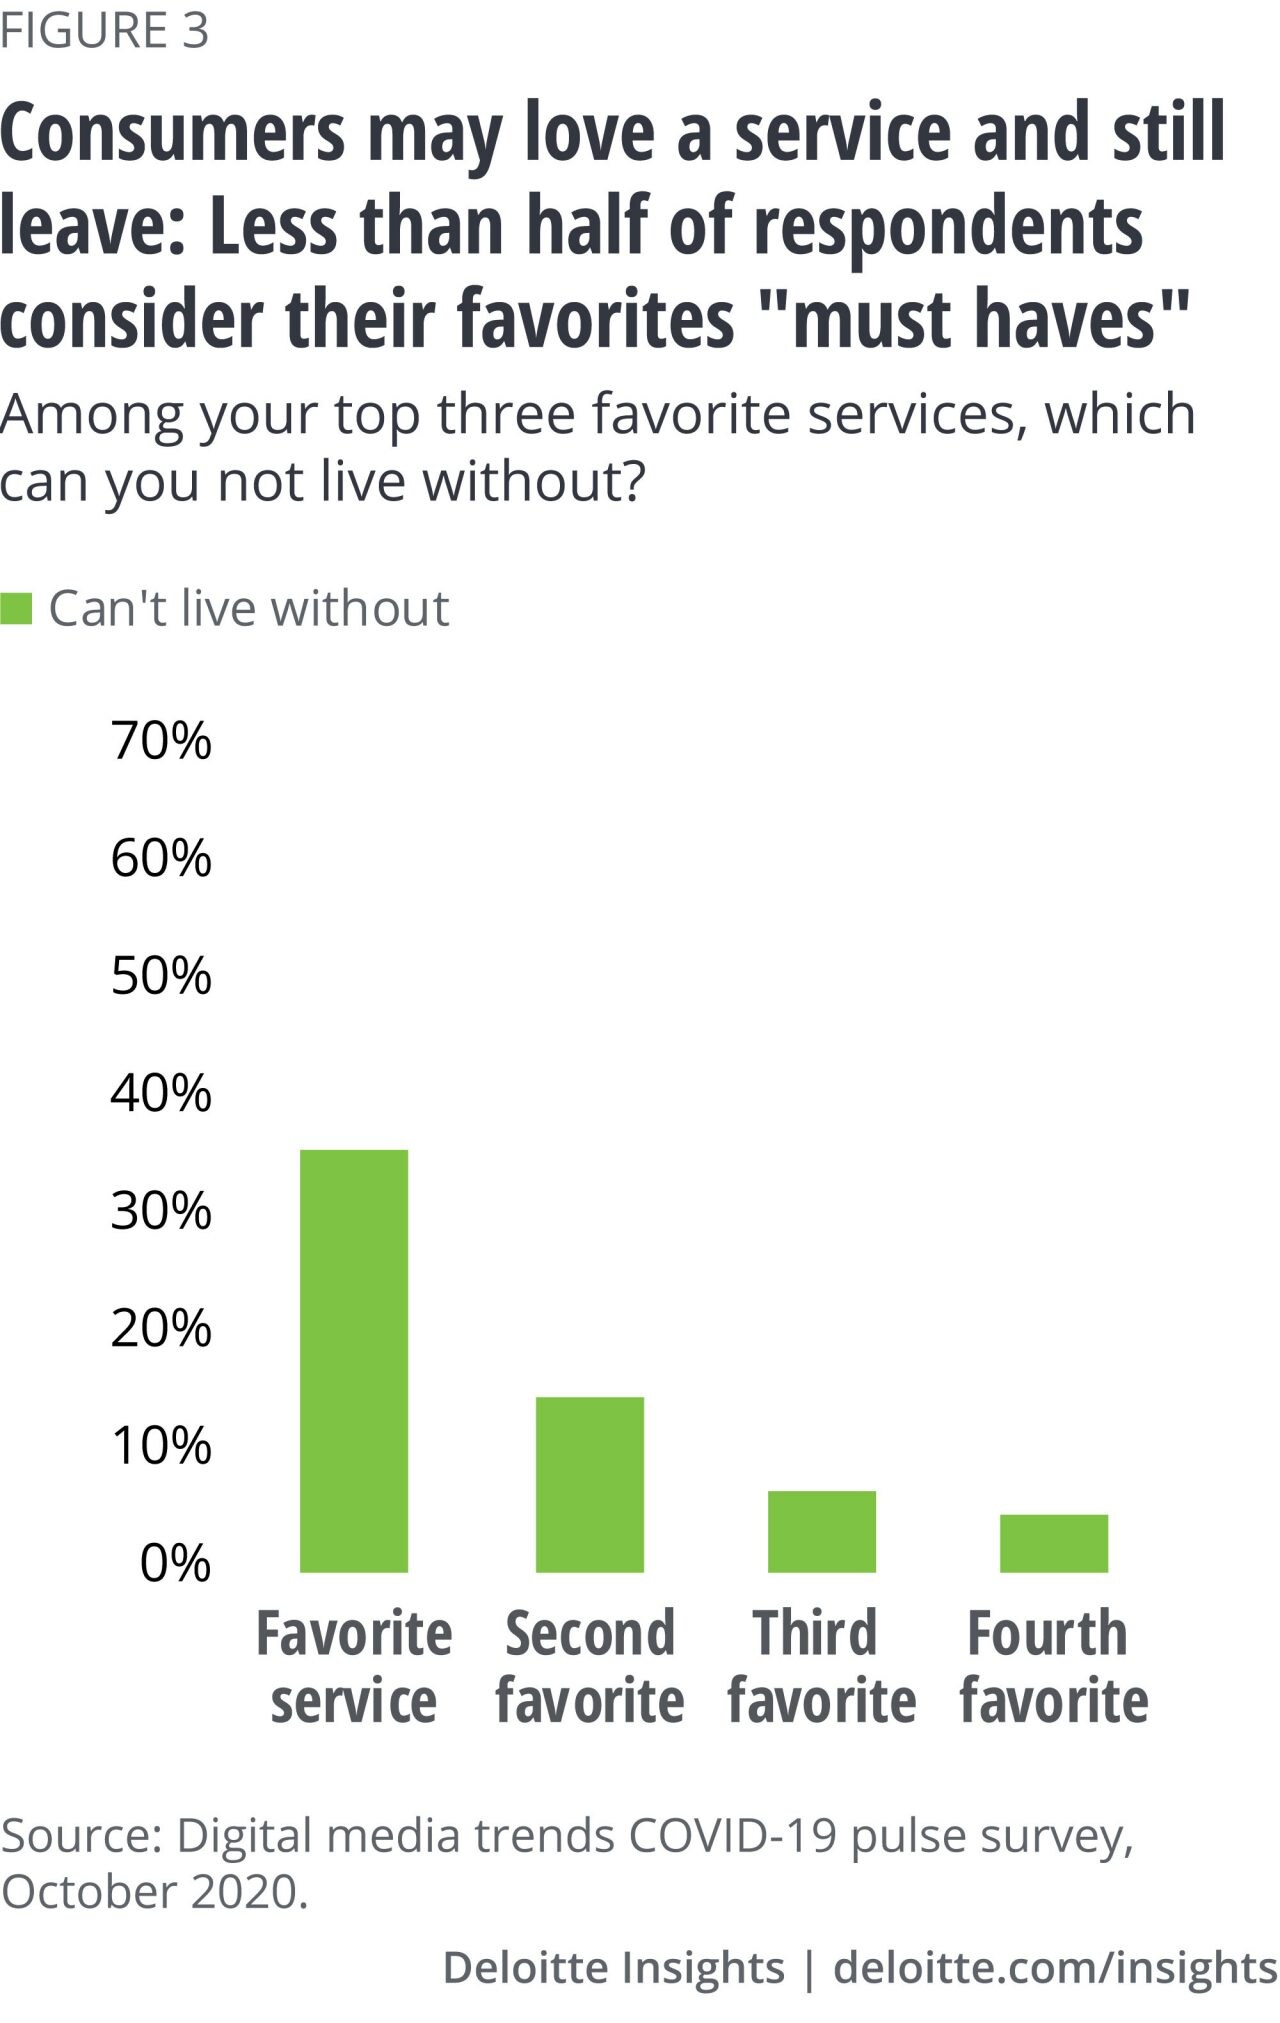 Figure 3. Consumers may love a service and still leave: Less than half of respondents consider their favorites “must haves”